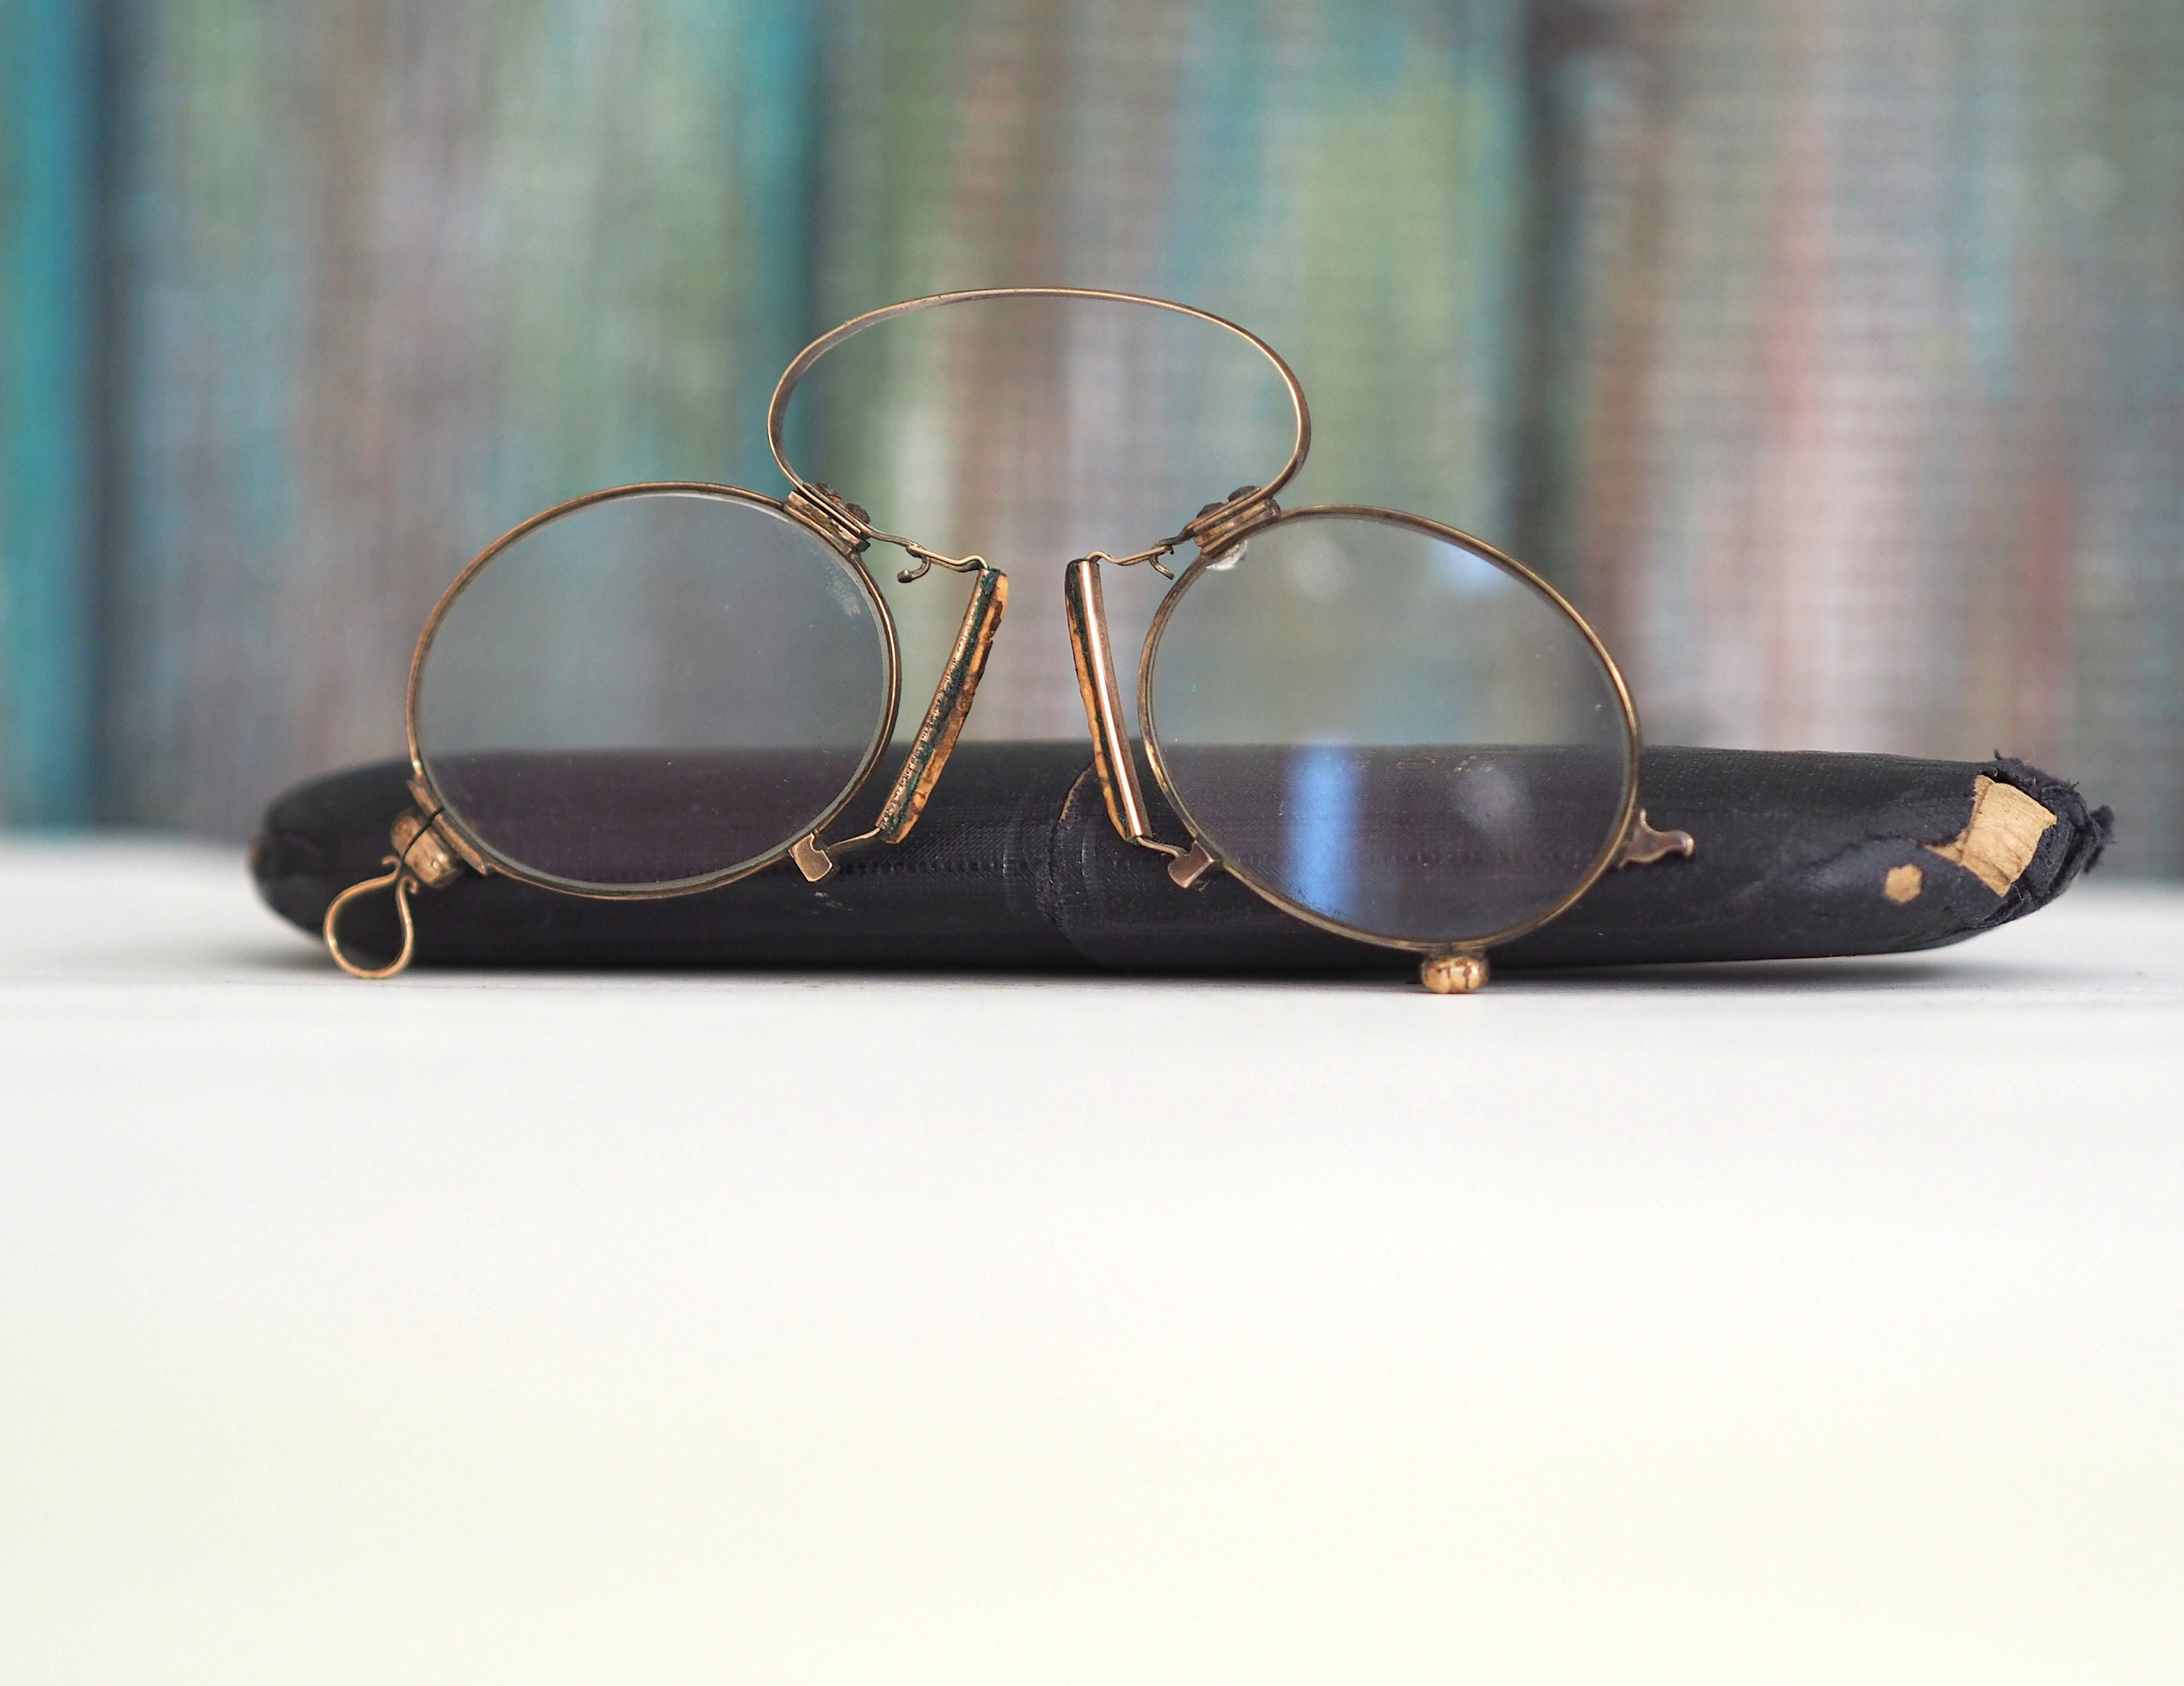 What are Pince-nez Glasses?